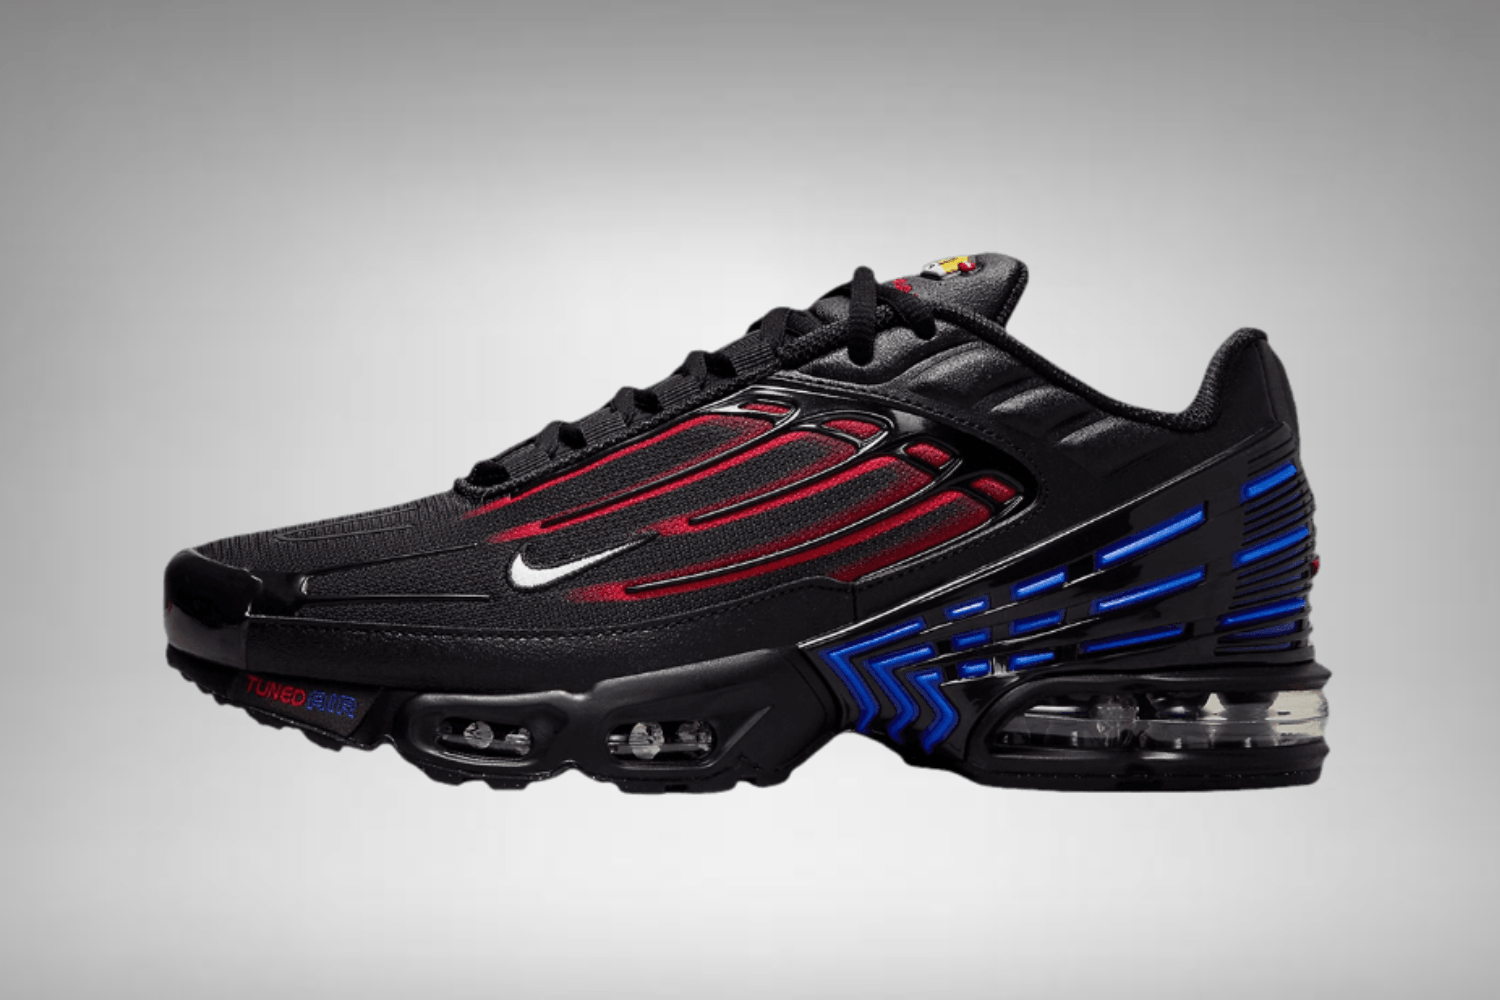 Nike is dropping Spider-Man inspired Air Max Plus 3